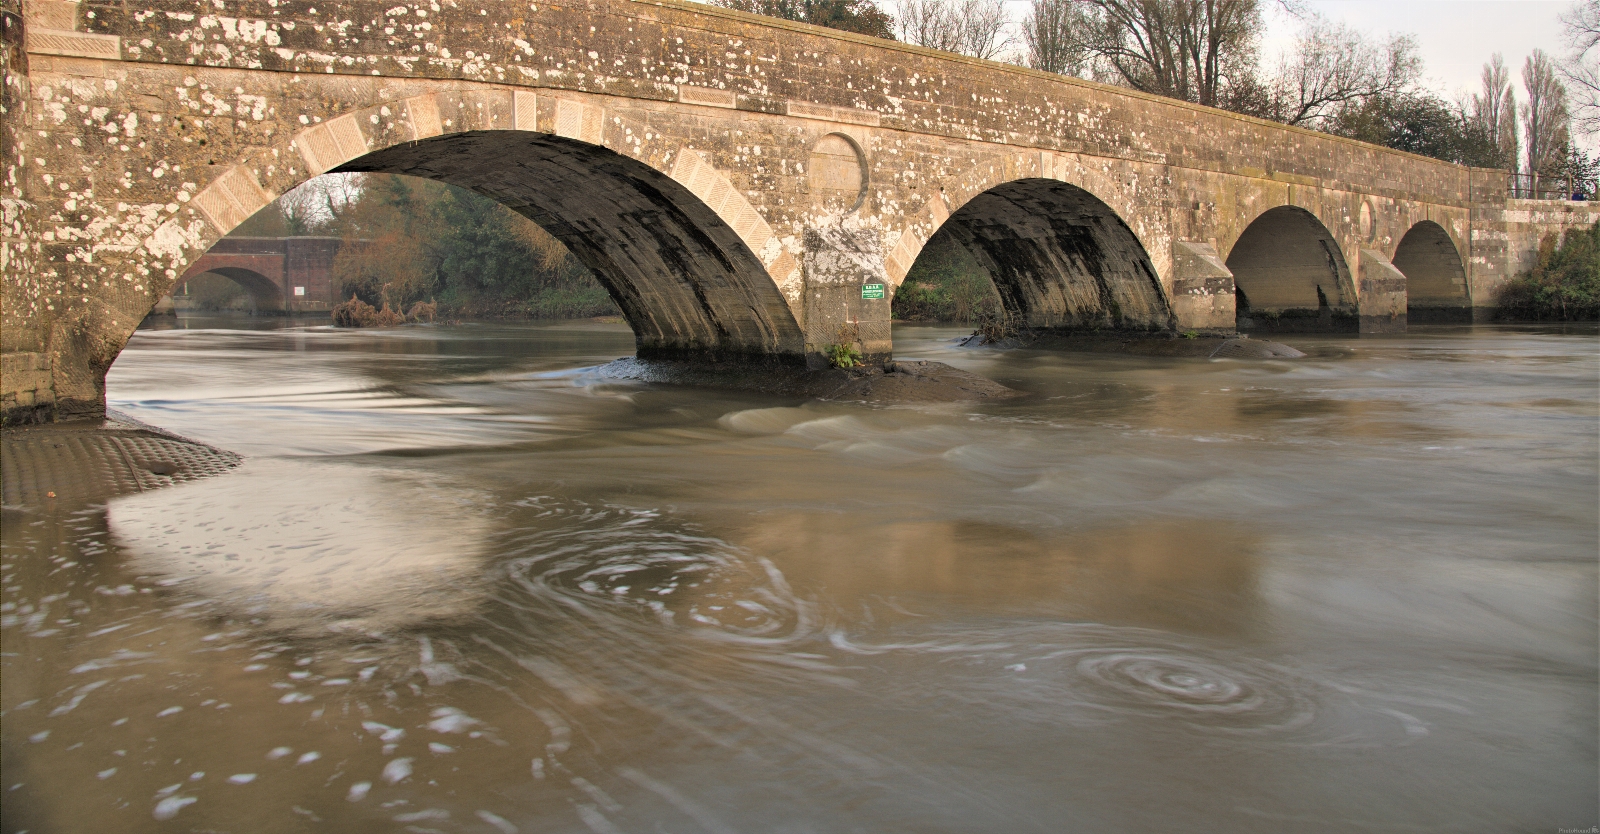 Image of Old Iford Bridge by michael bennett